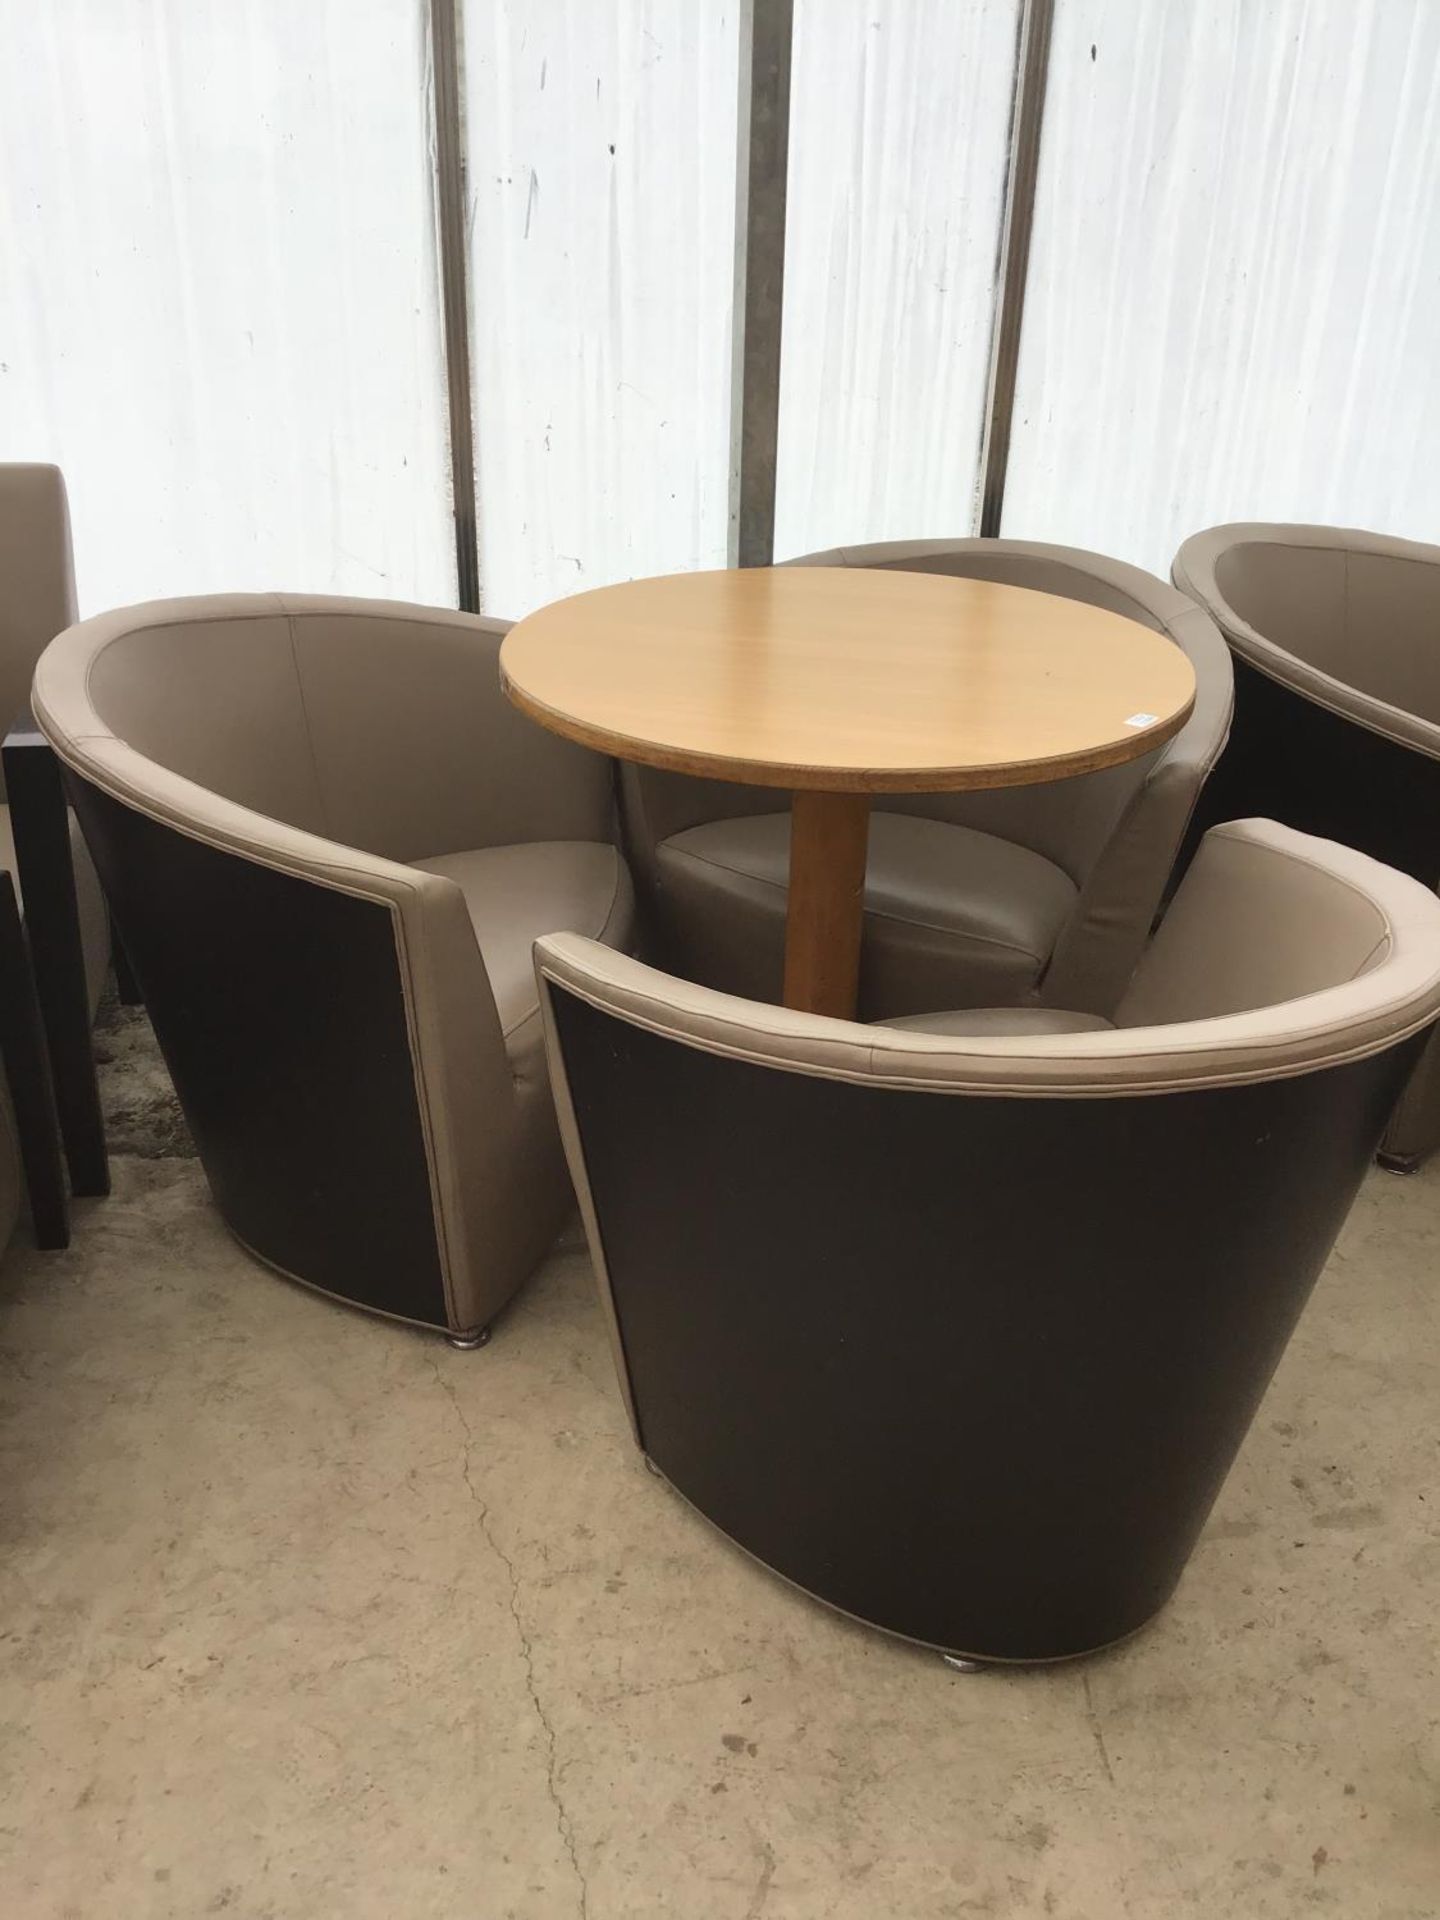 THREE MODERN TUB CHAIRS AND TABLE